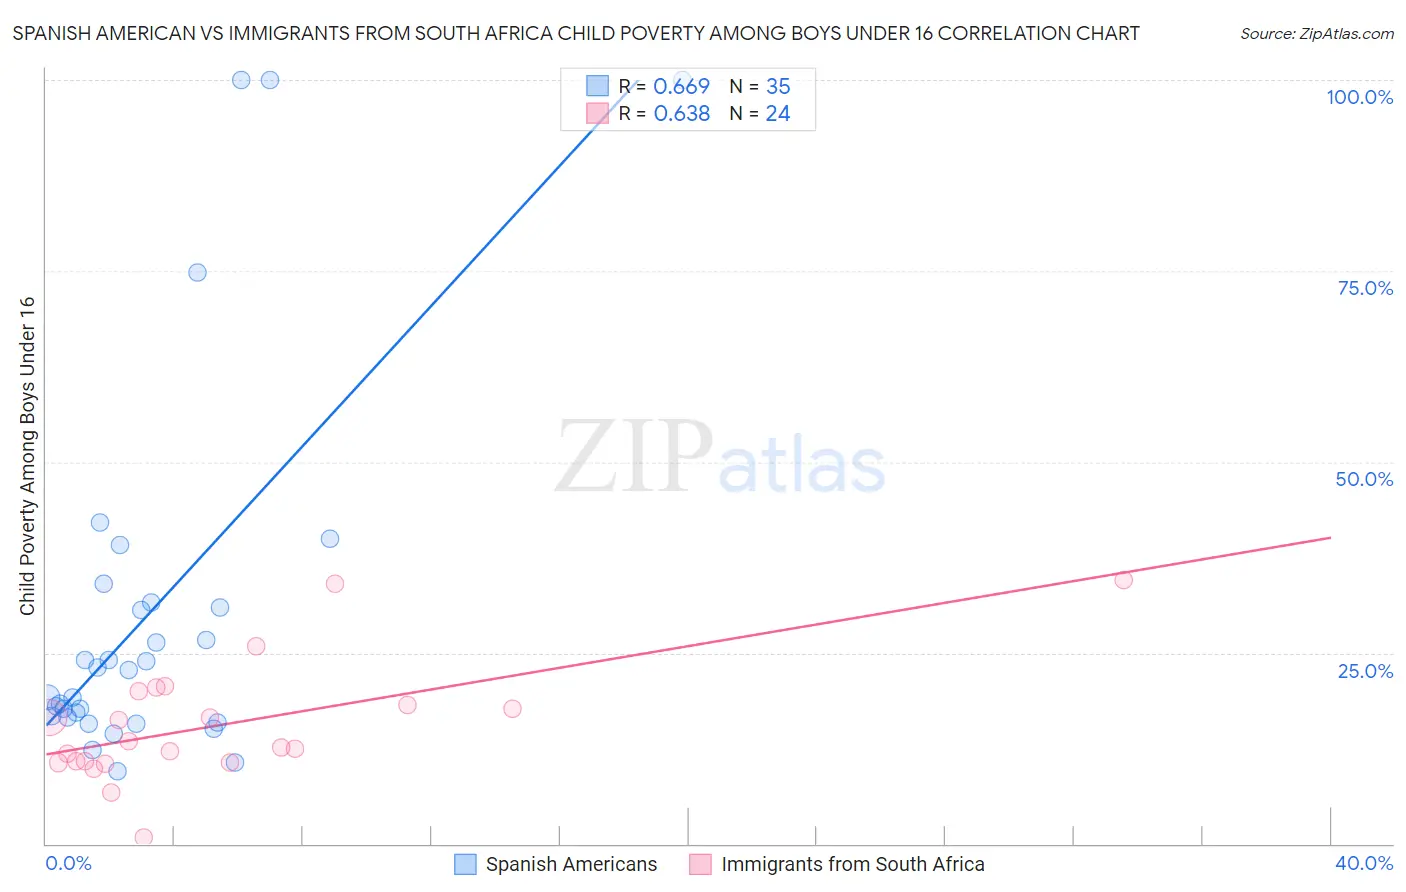 Spanish American vs Immigrants from South Africa Child Poverty Among Boys Under 16